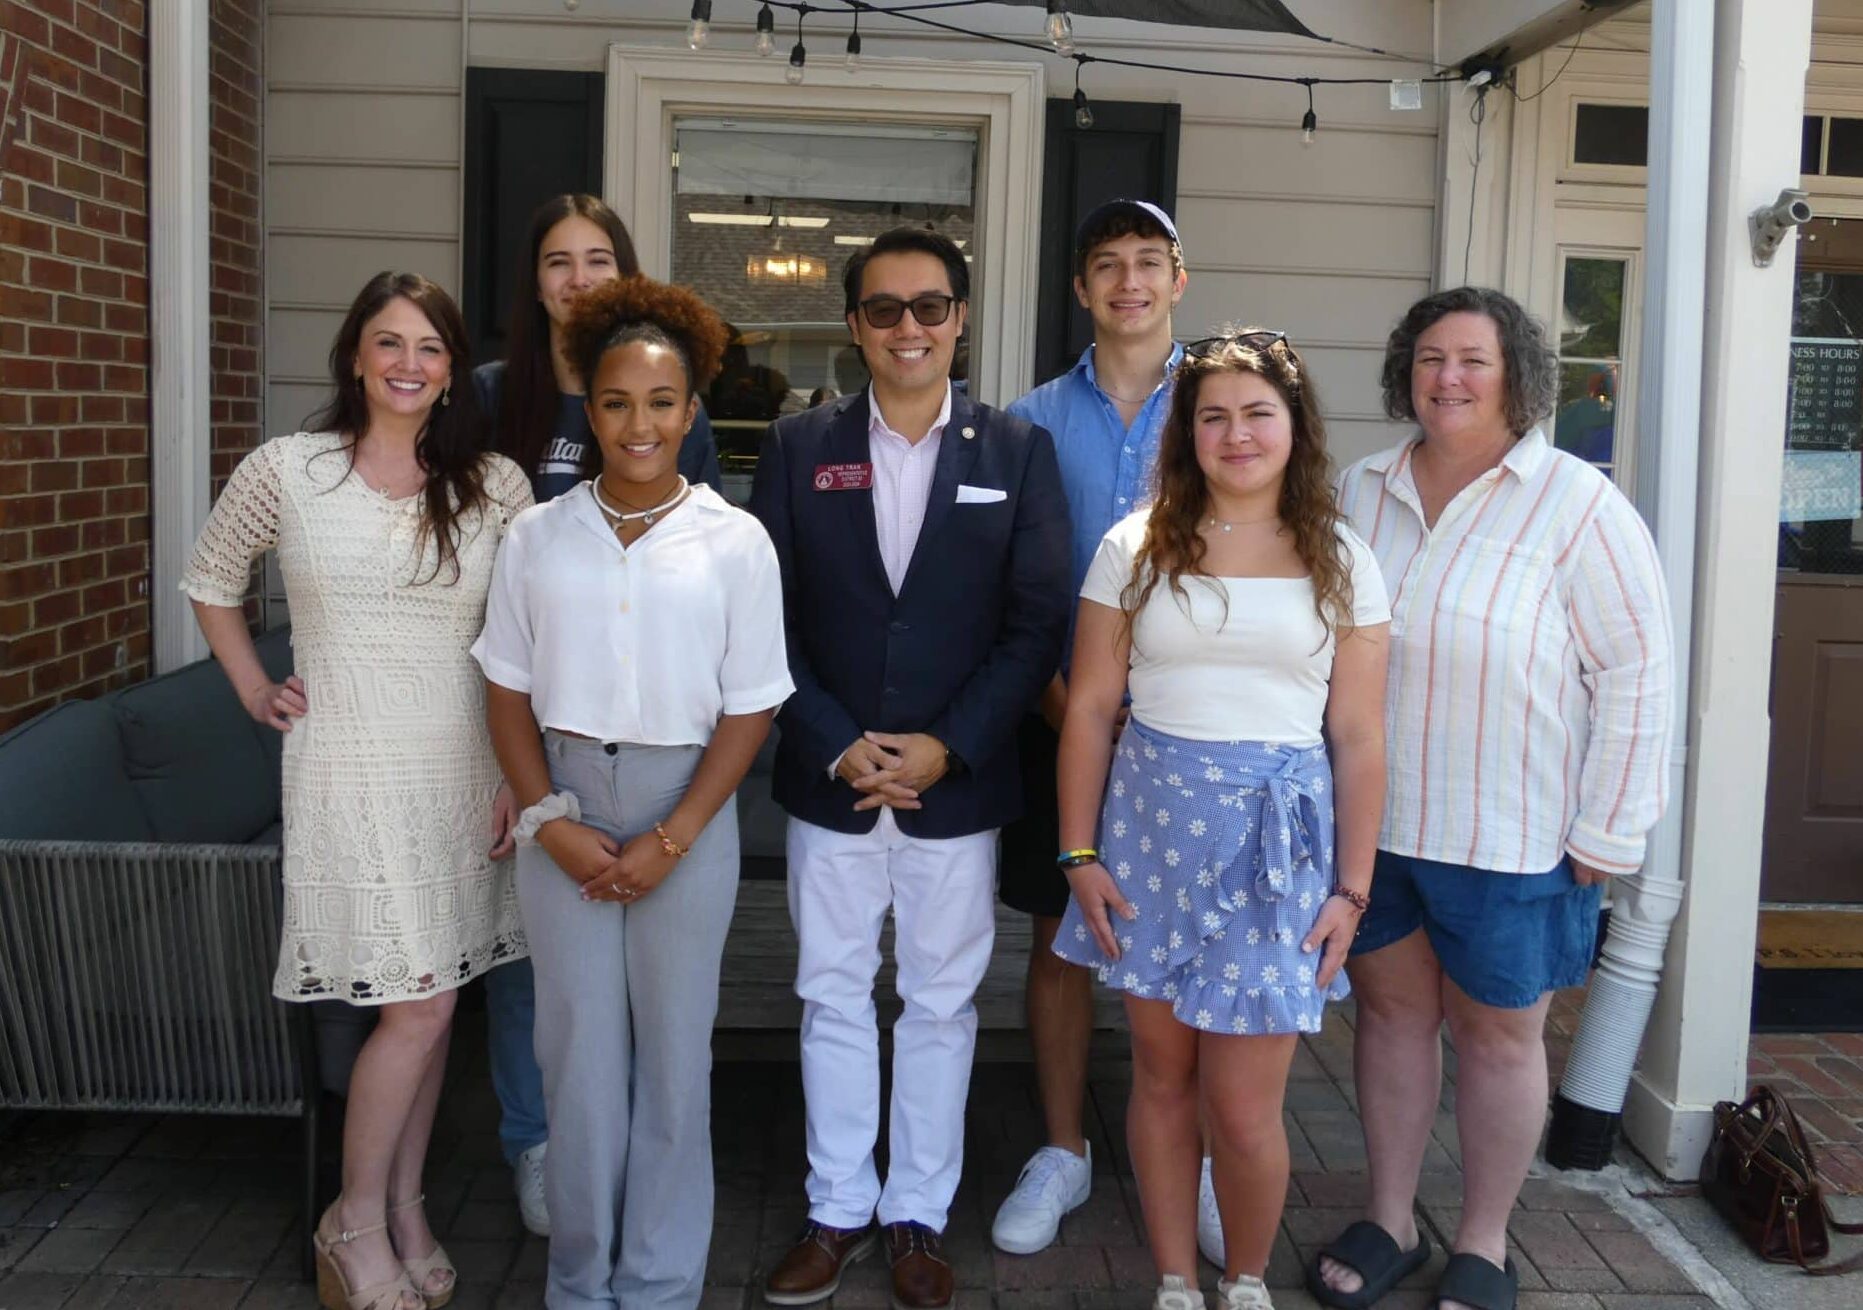 The four exchange students and their coordinators with Long Tranoutside of Peachy Corners Café